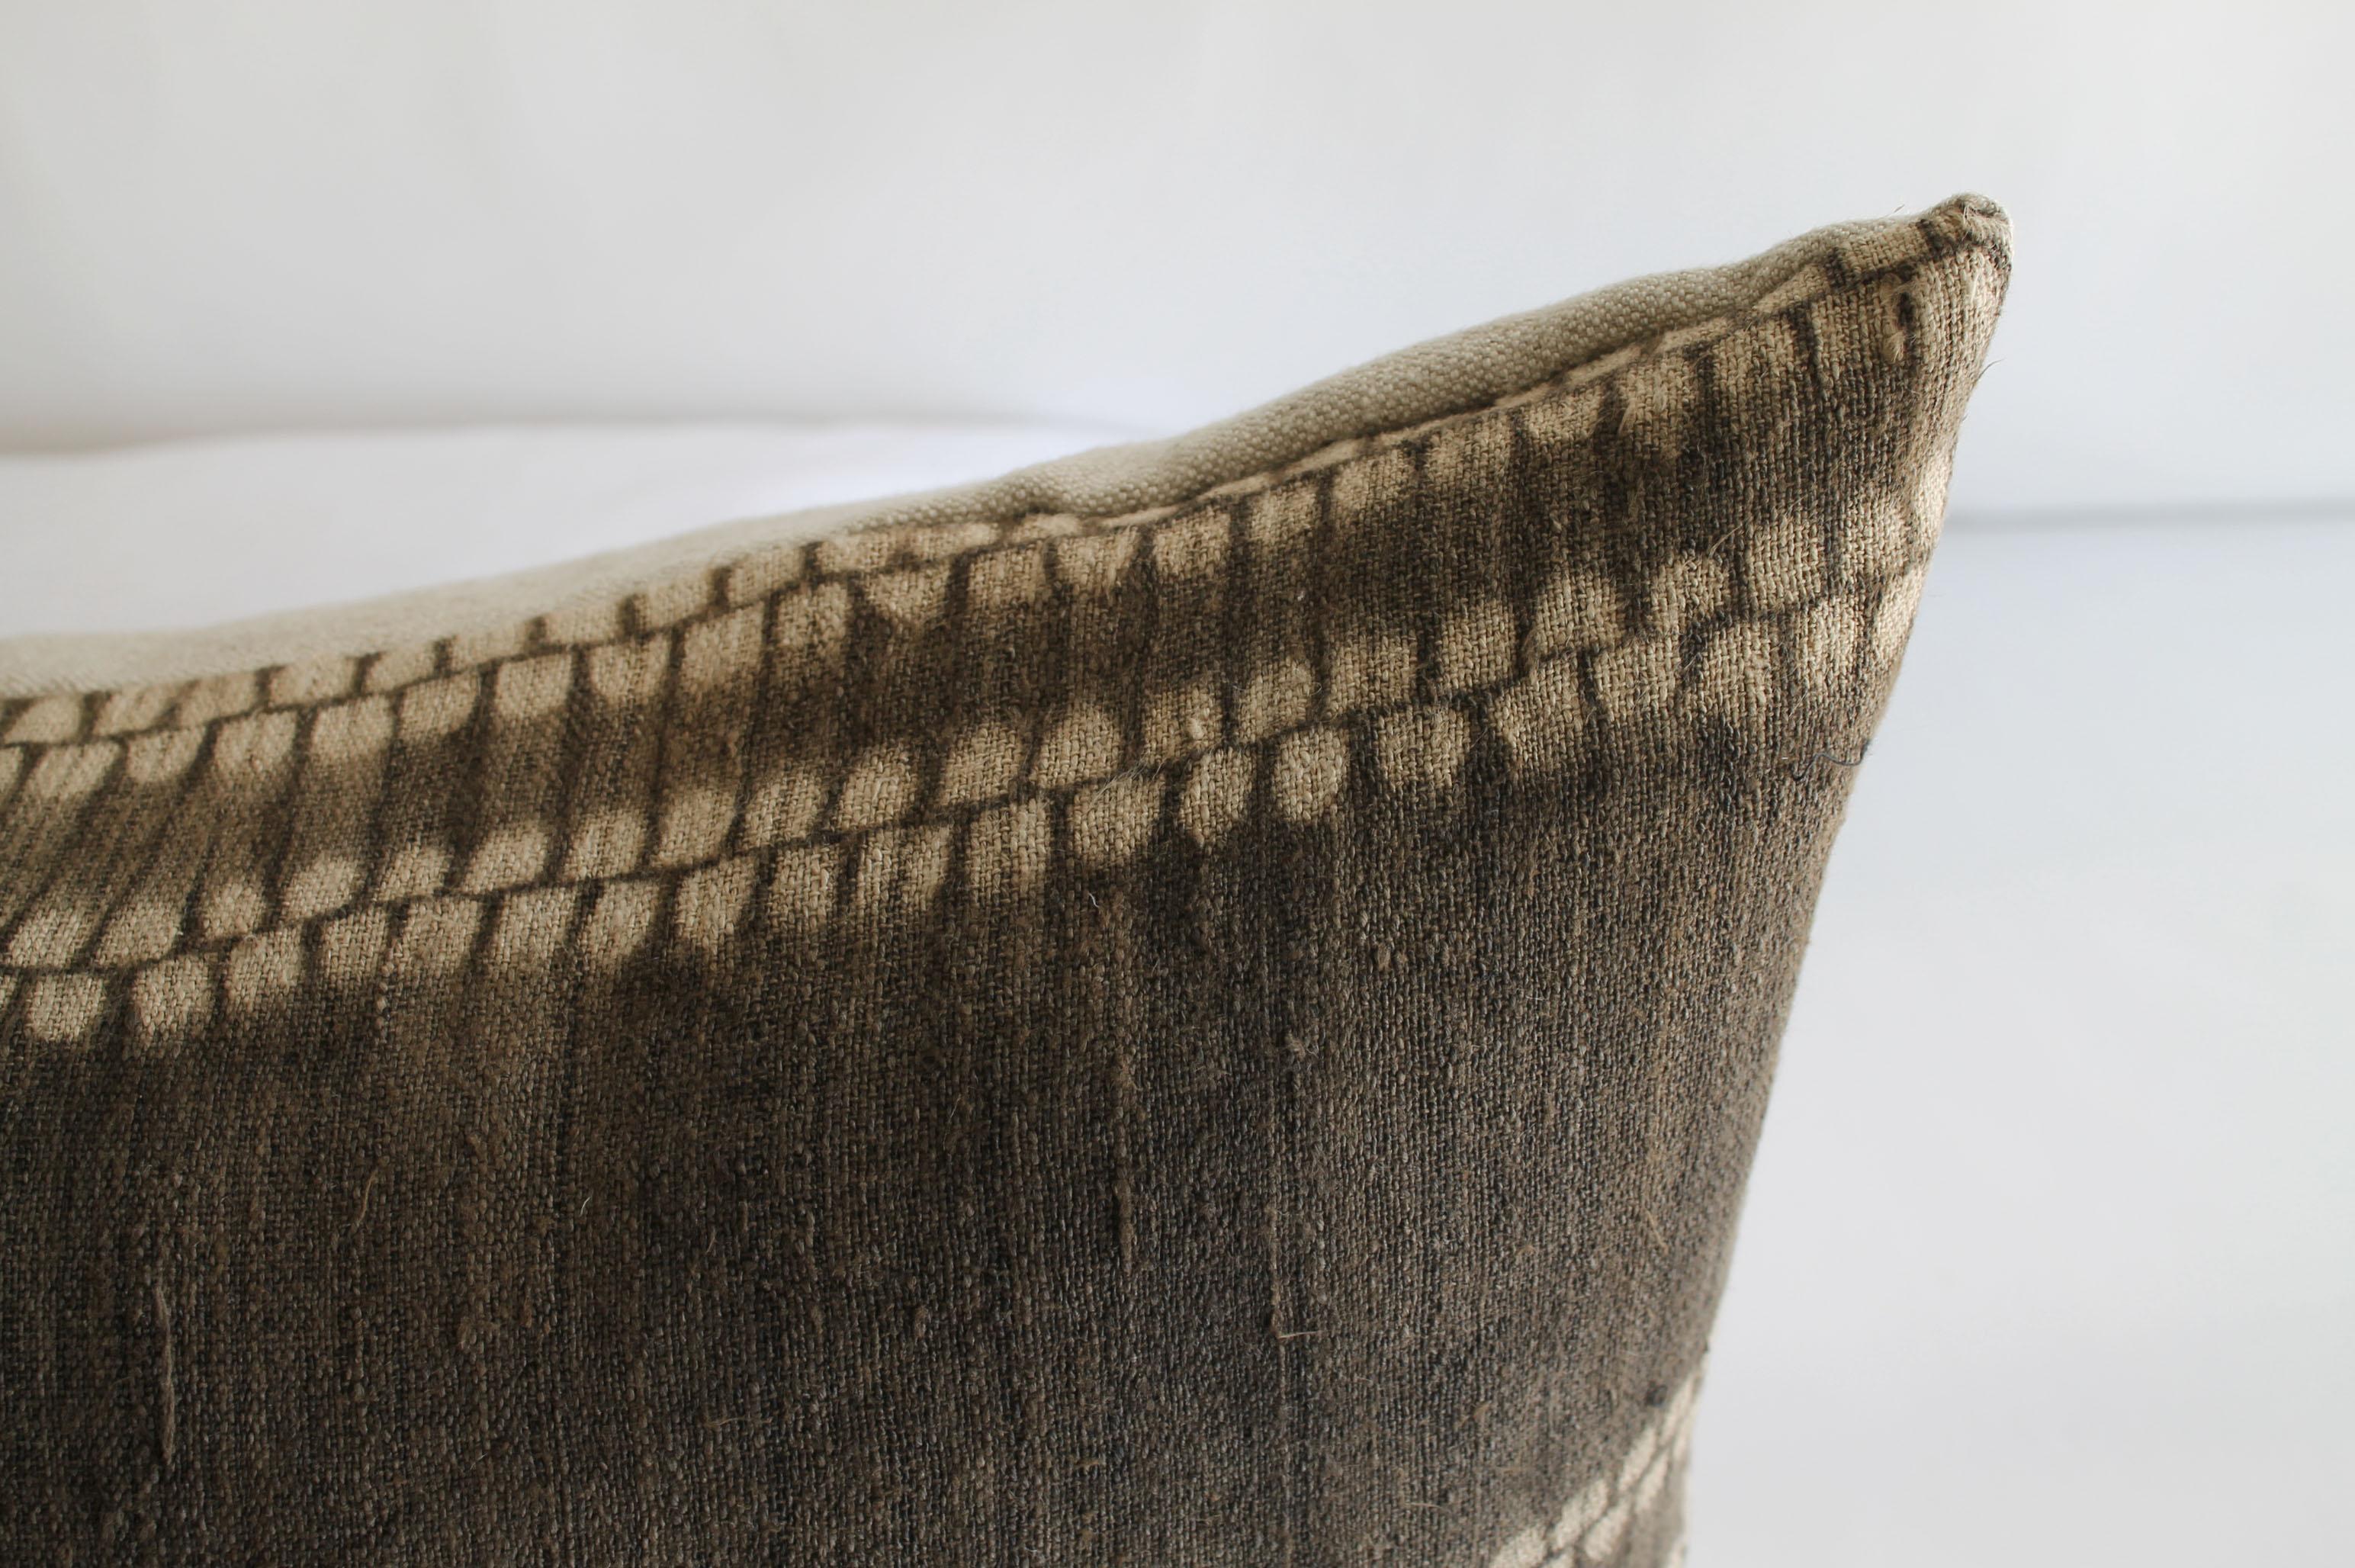 Chinese Antique Tribal Fabric in Dark Brown with Natural Linen